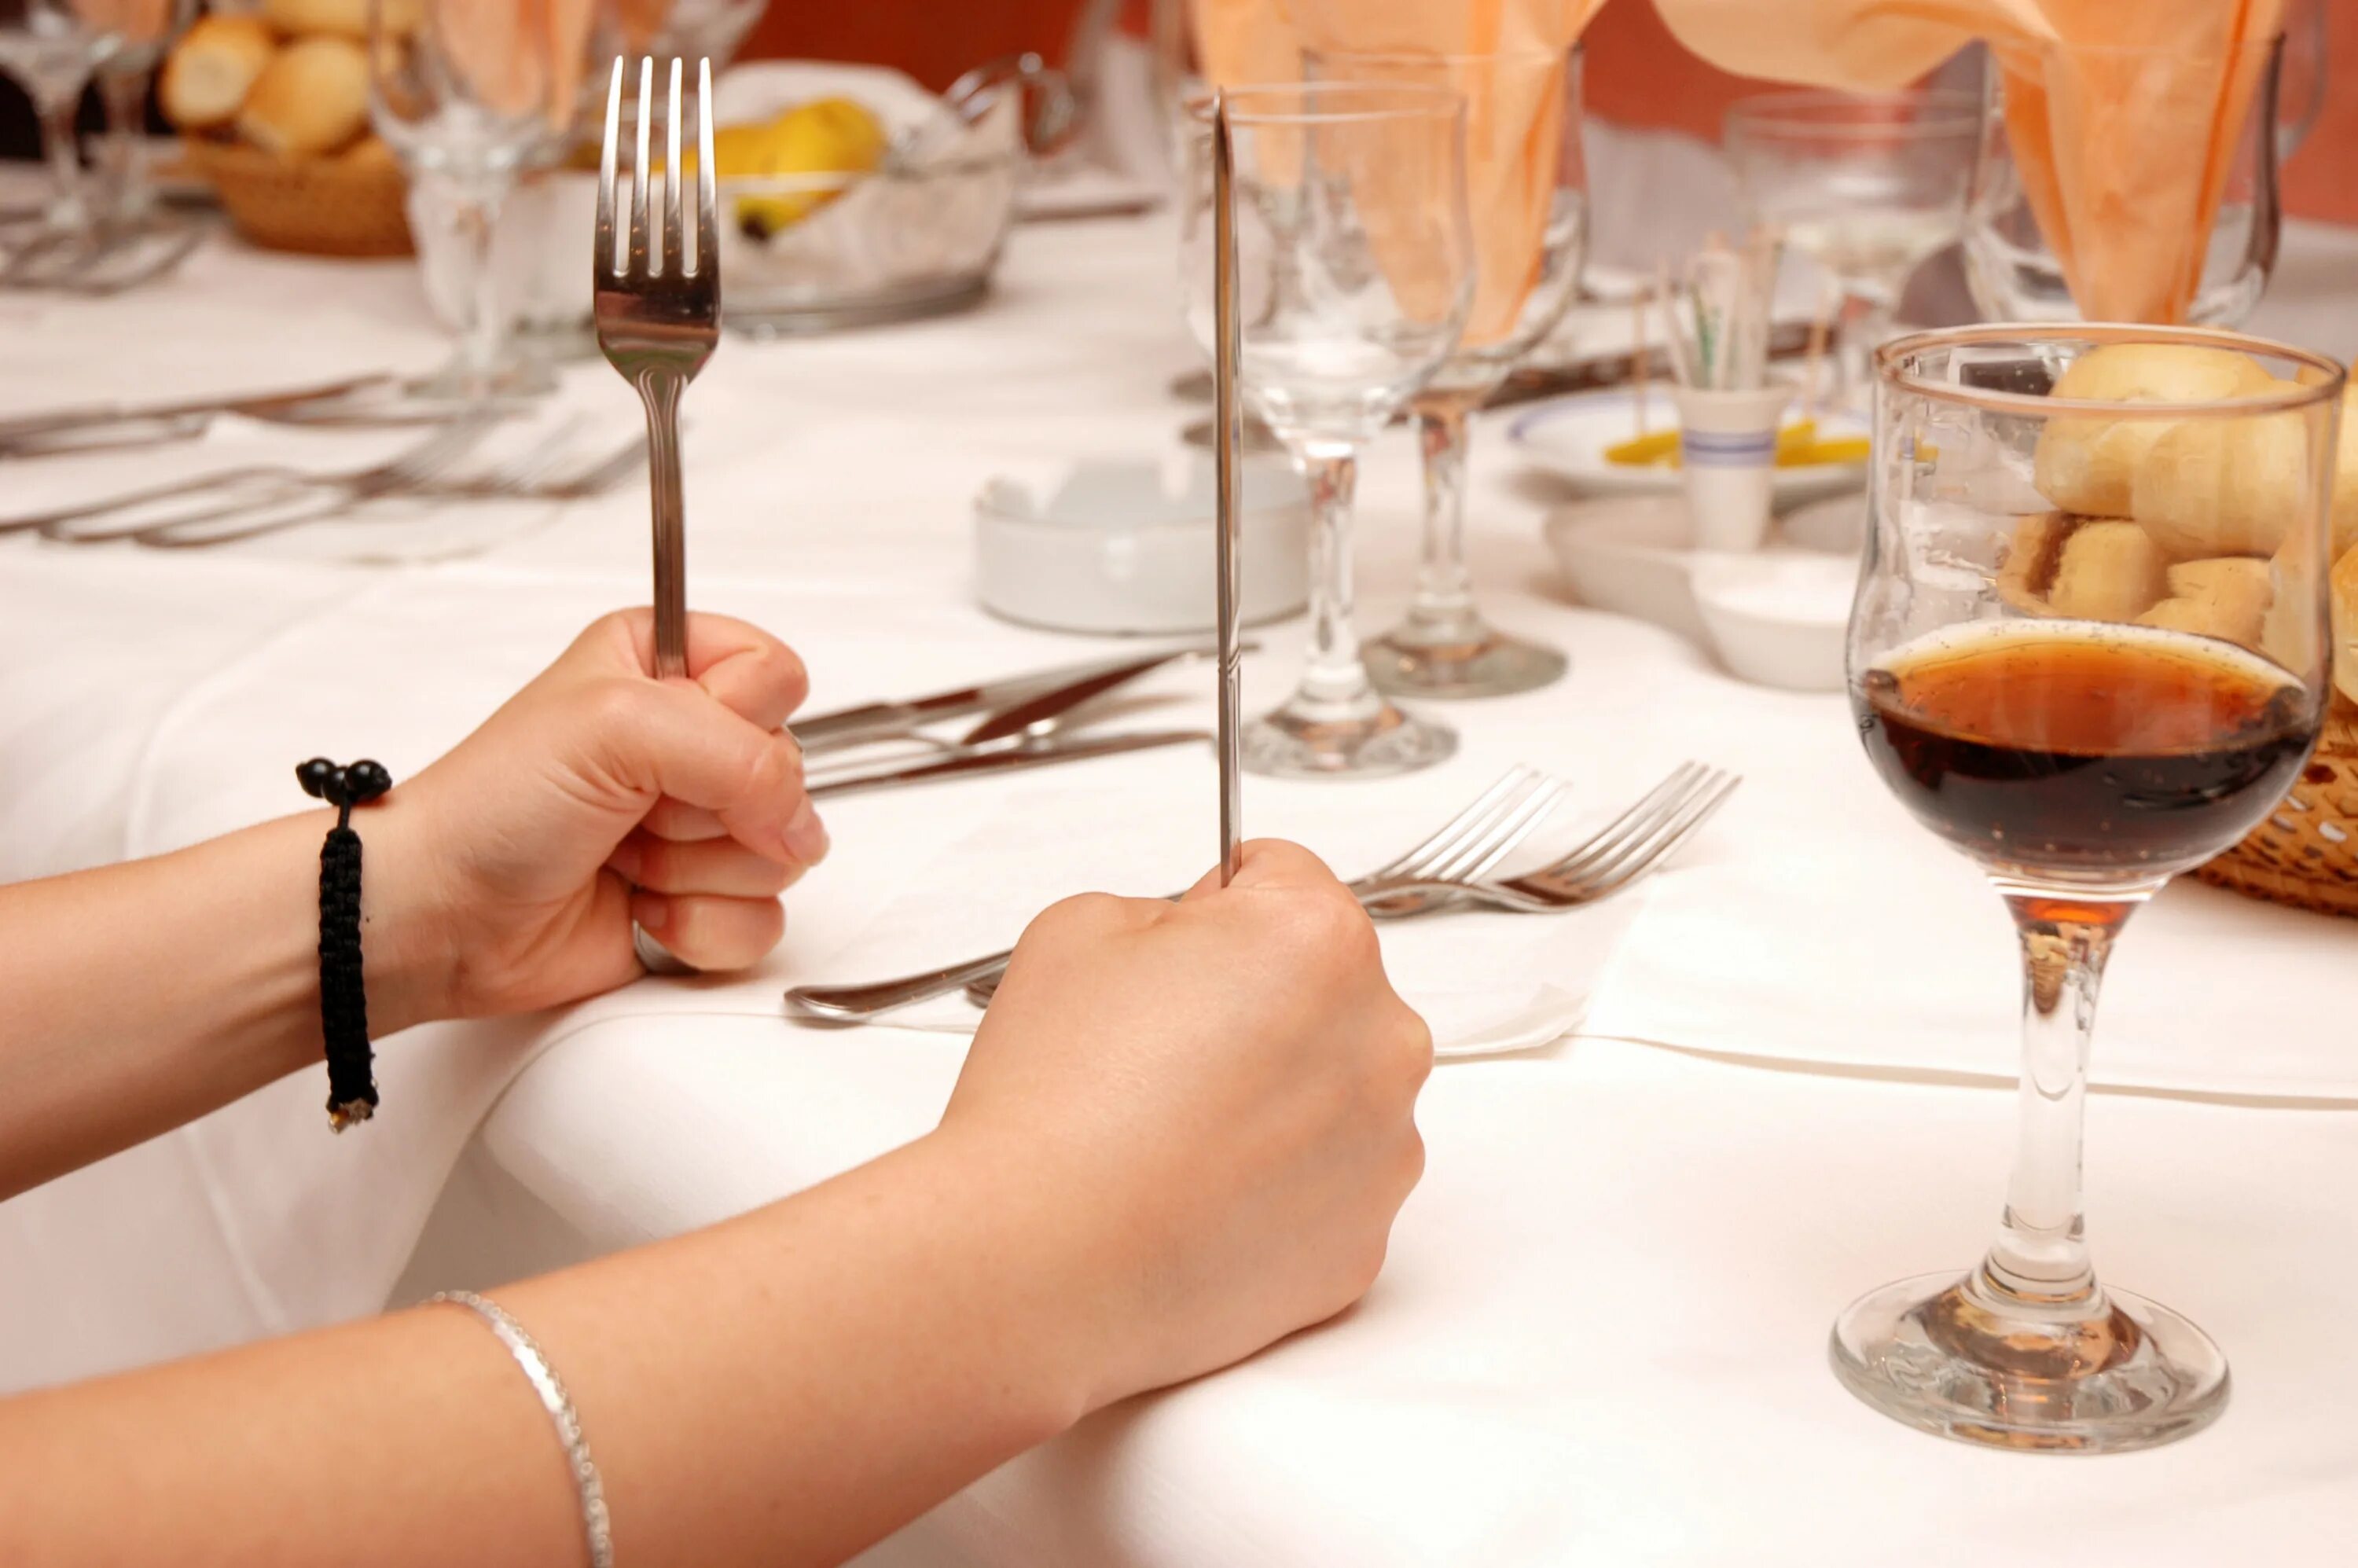 Table manners. Bad Table manners. Waiting food. Table manners photos uk.